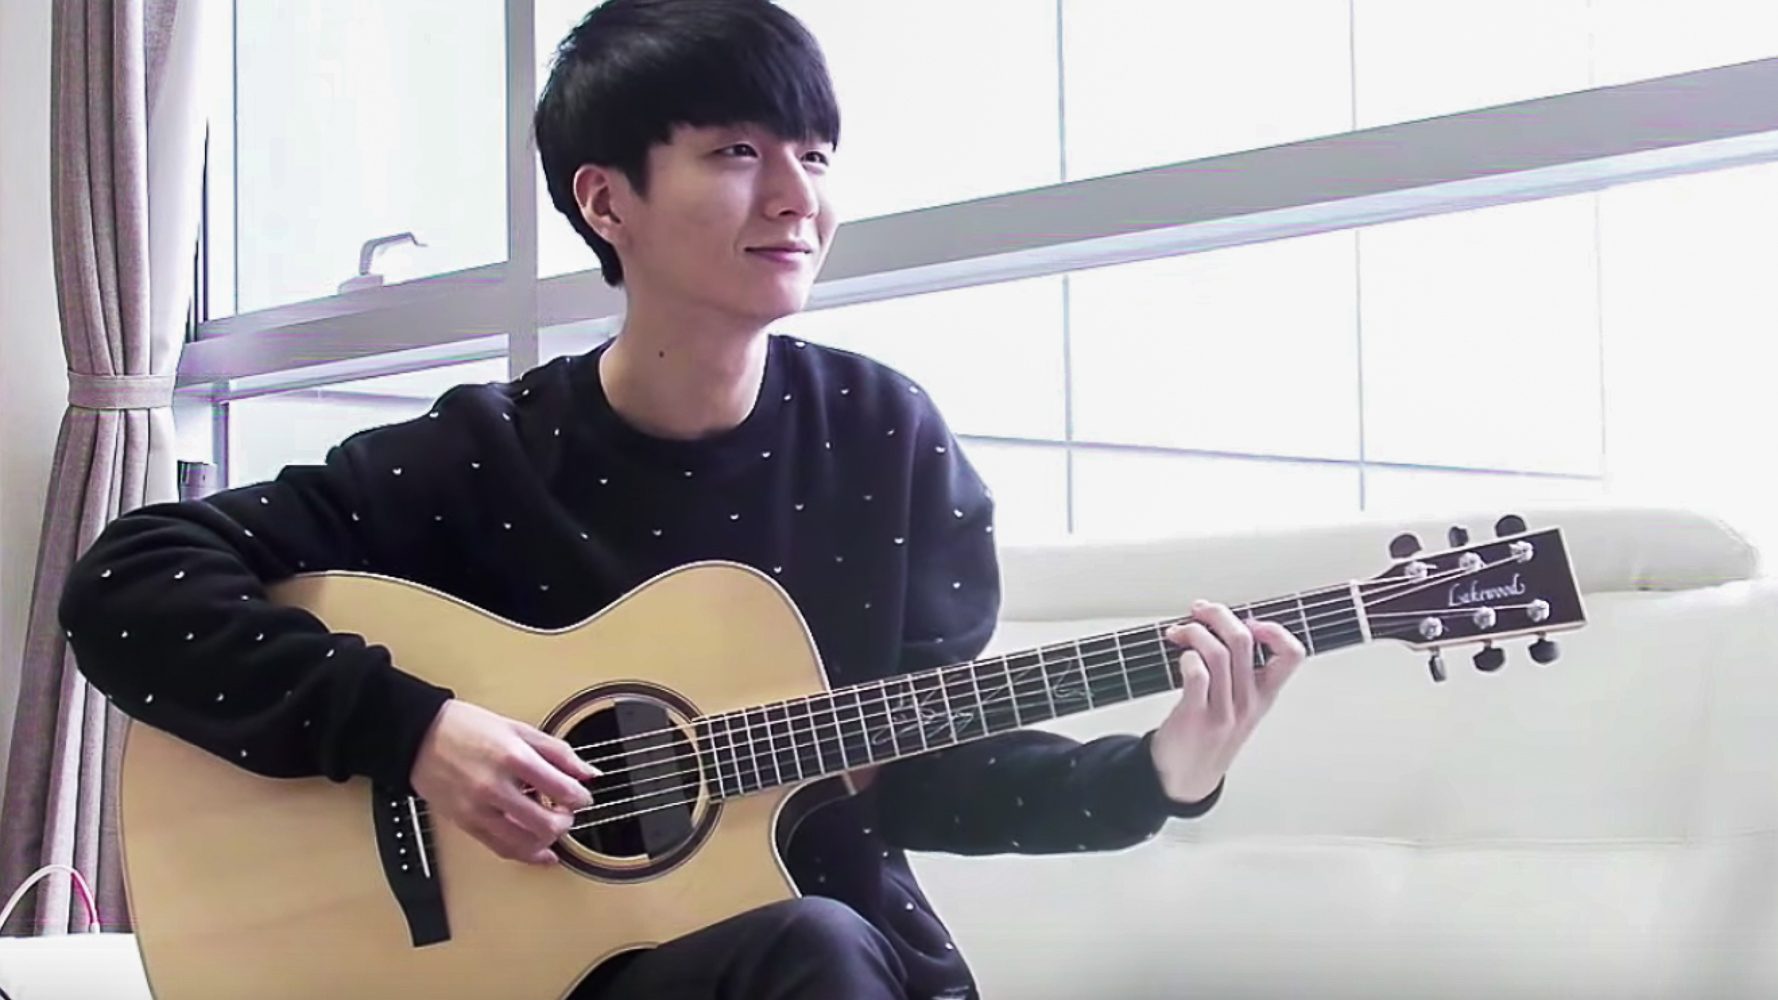 Sungha Jung: Growing up on YouTube